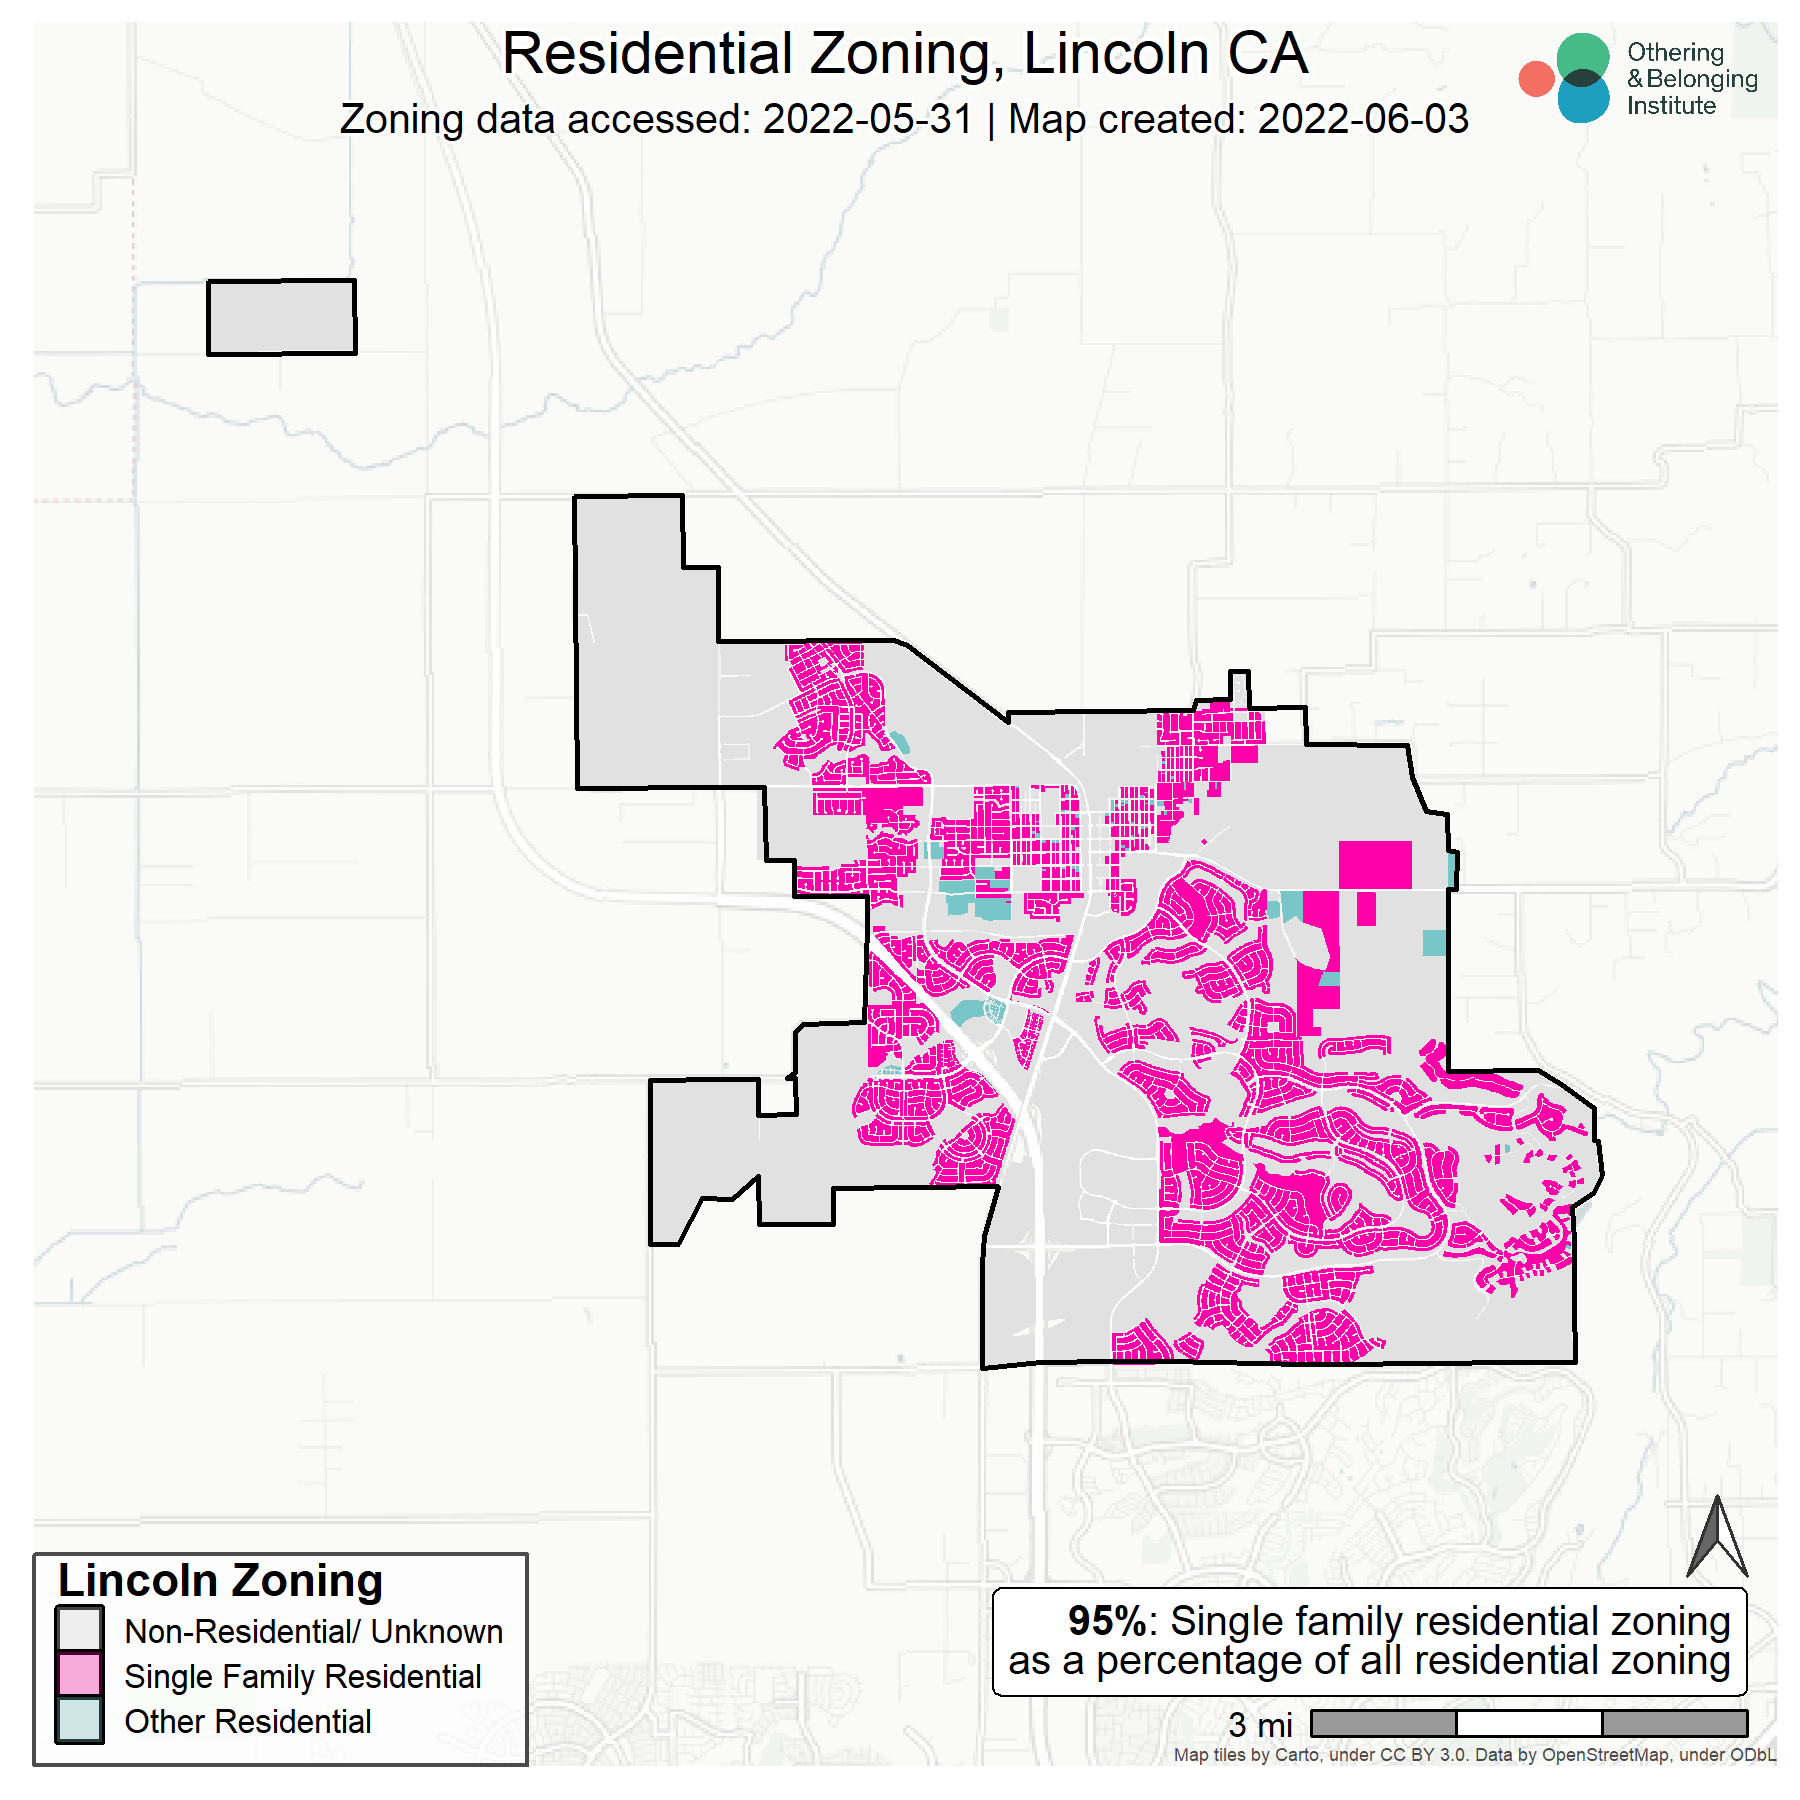 Zoning map of Lincoln